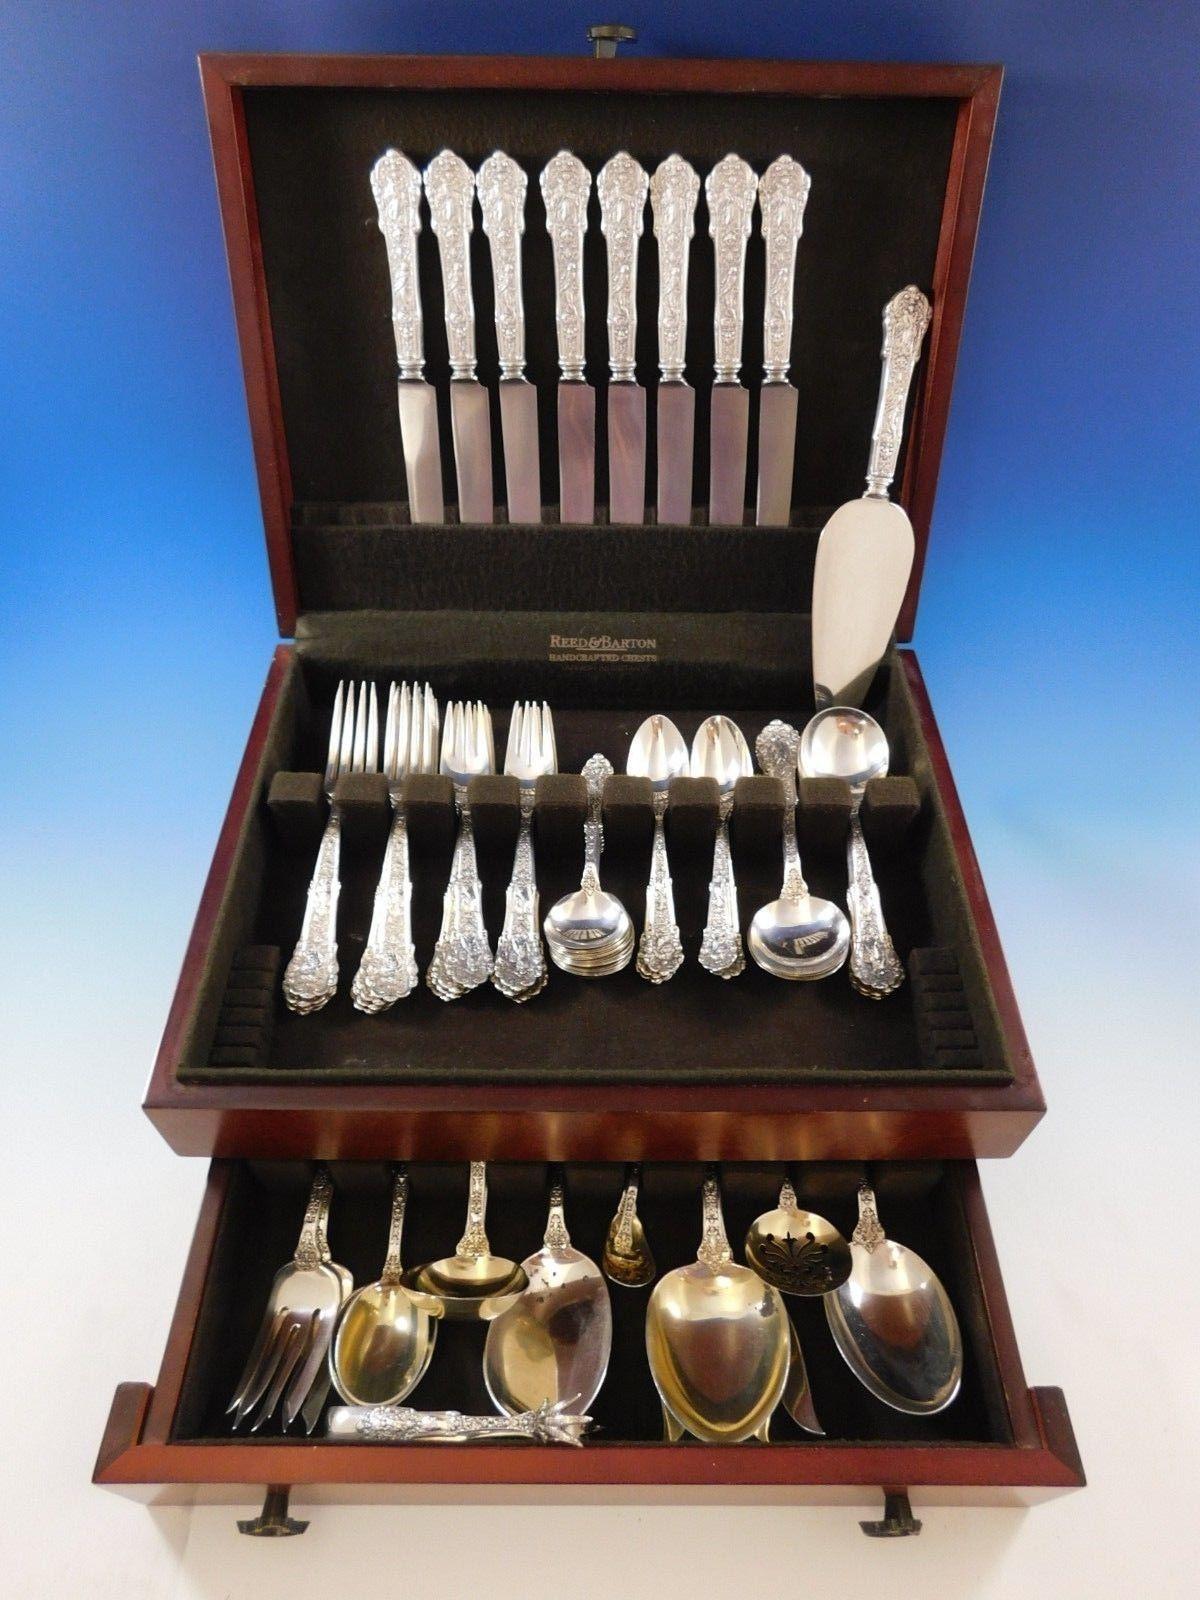 This absolutely stunning multi-motif pattern, Coligni by Gorham sterling sterling silver dinner size flatware set - 63 Pieces. This set includes:

Eight dinner size knives, 9 3/4